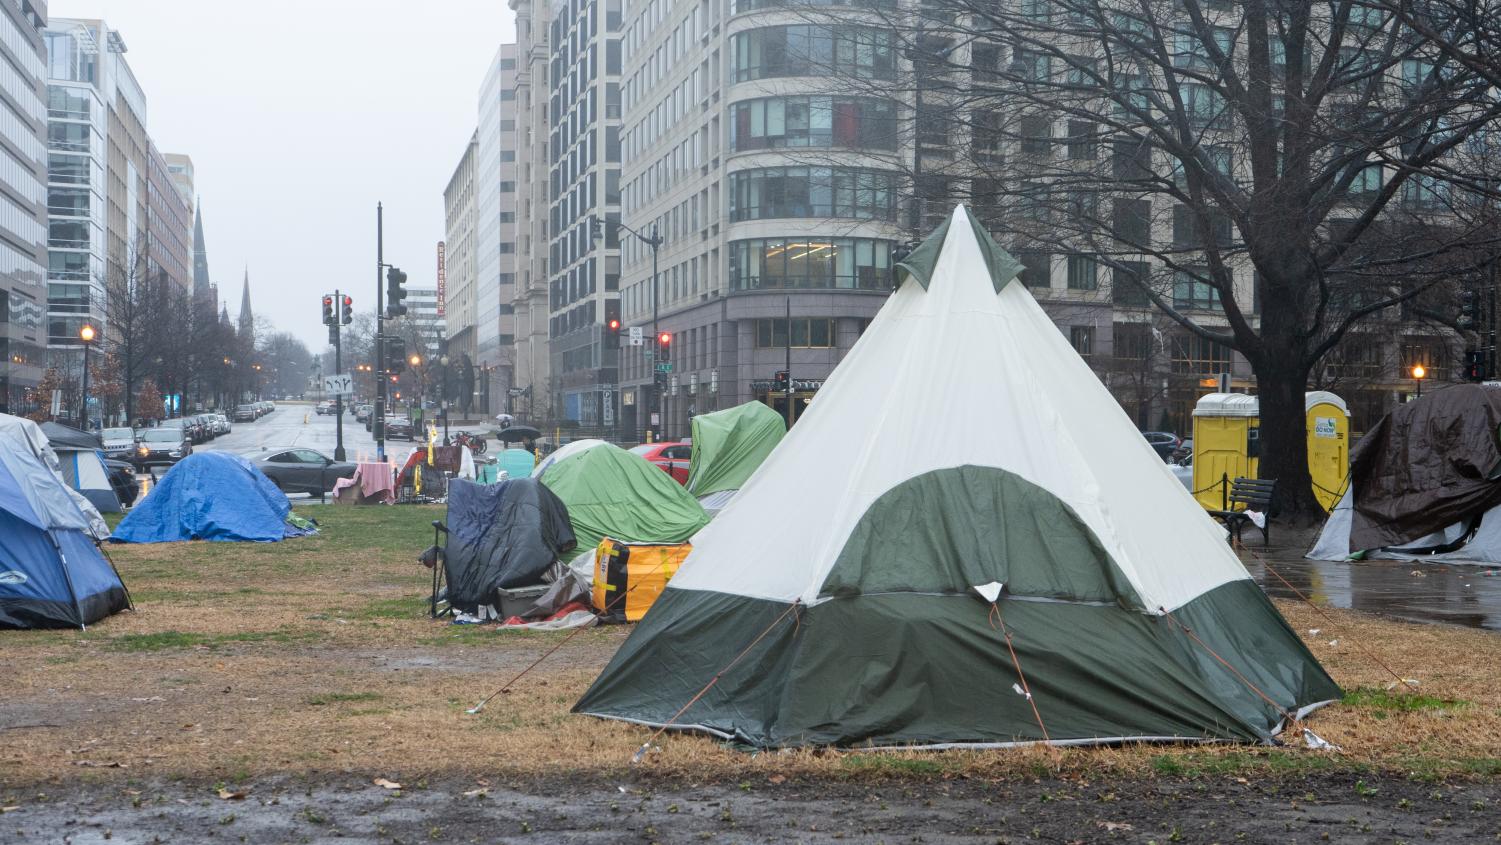 Encampment+clearings+displace+people+experiencing+homelessness